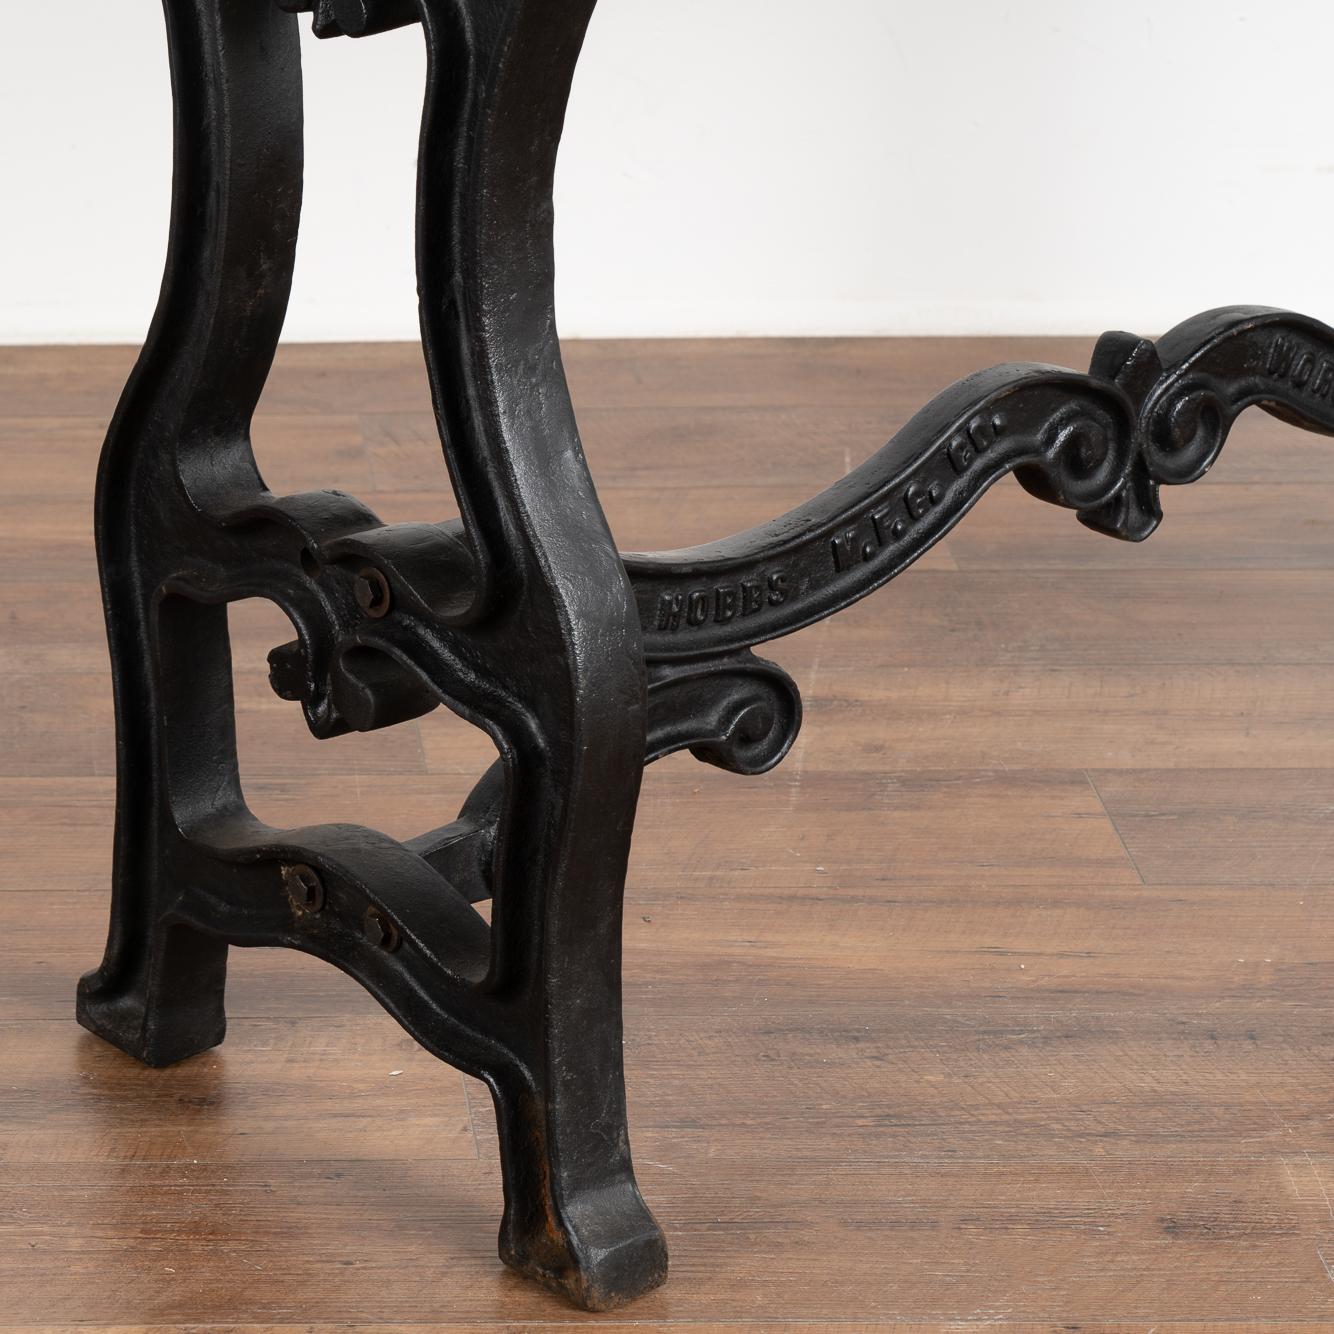 20th Century Rustic Vintage Console Table with Cast Iron Industrial Legs, circa 1900s For Sale